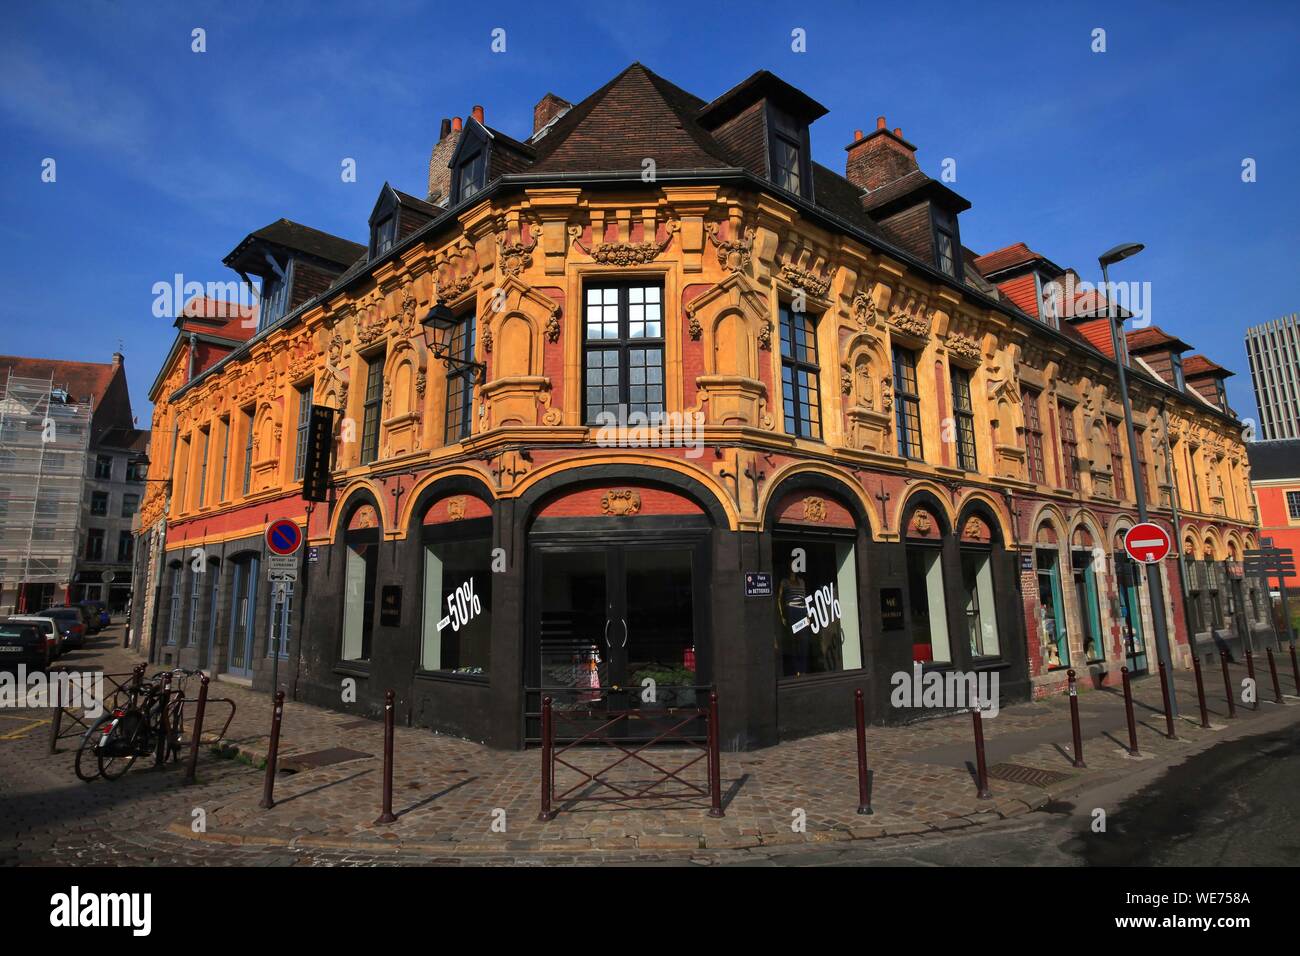 France, Nord, Lille The house of Gilles de la Boë, also known as Bon Bouillon, is a Flemish Mannerist style house located at the corner of Place Louise de Bettignies and Avenue du Peuple Belge. Lille. It has been classified as a historical monument. It was built in 1636 Stock Photo